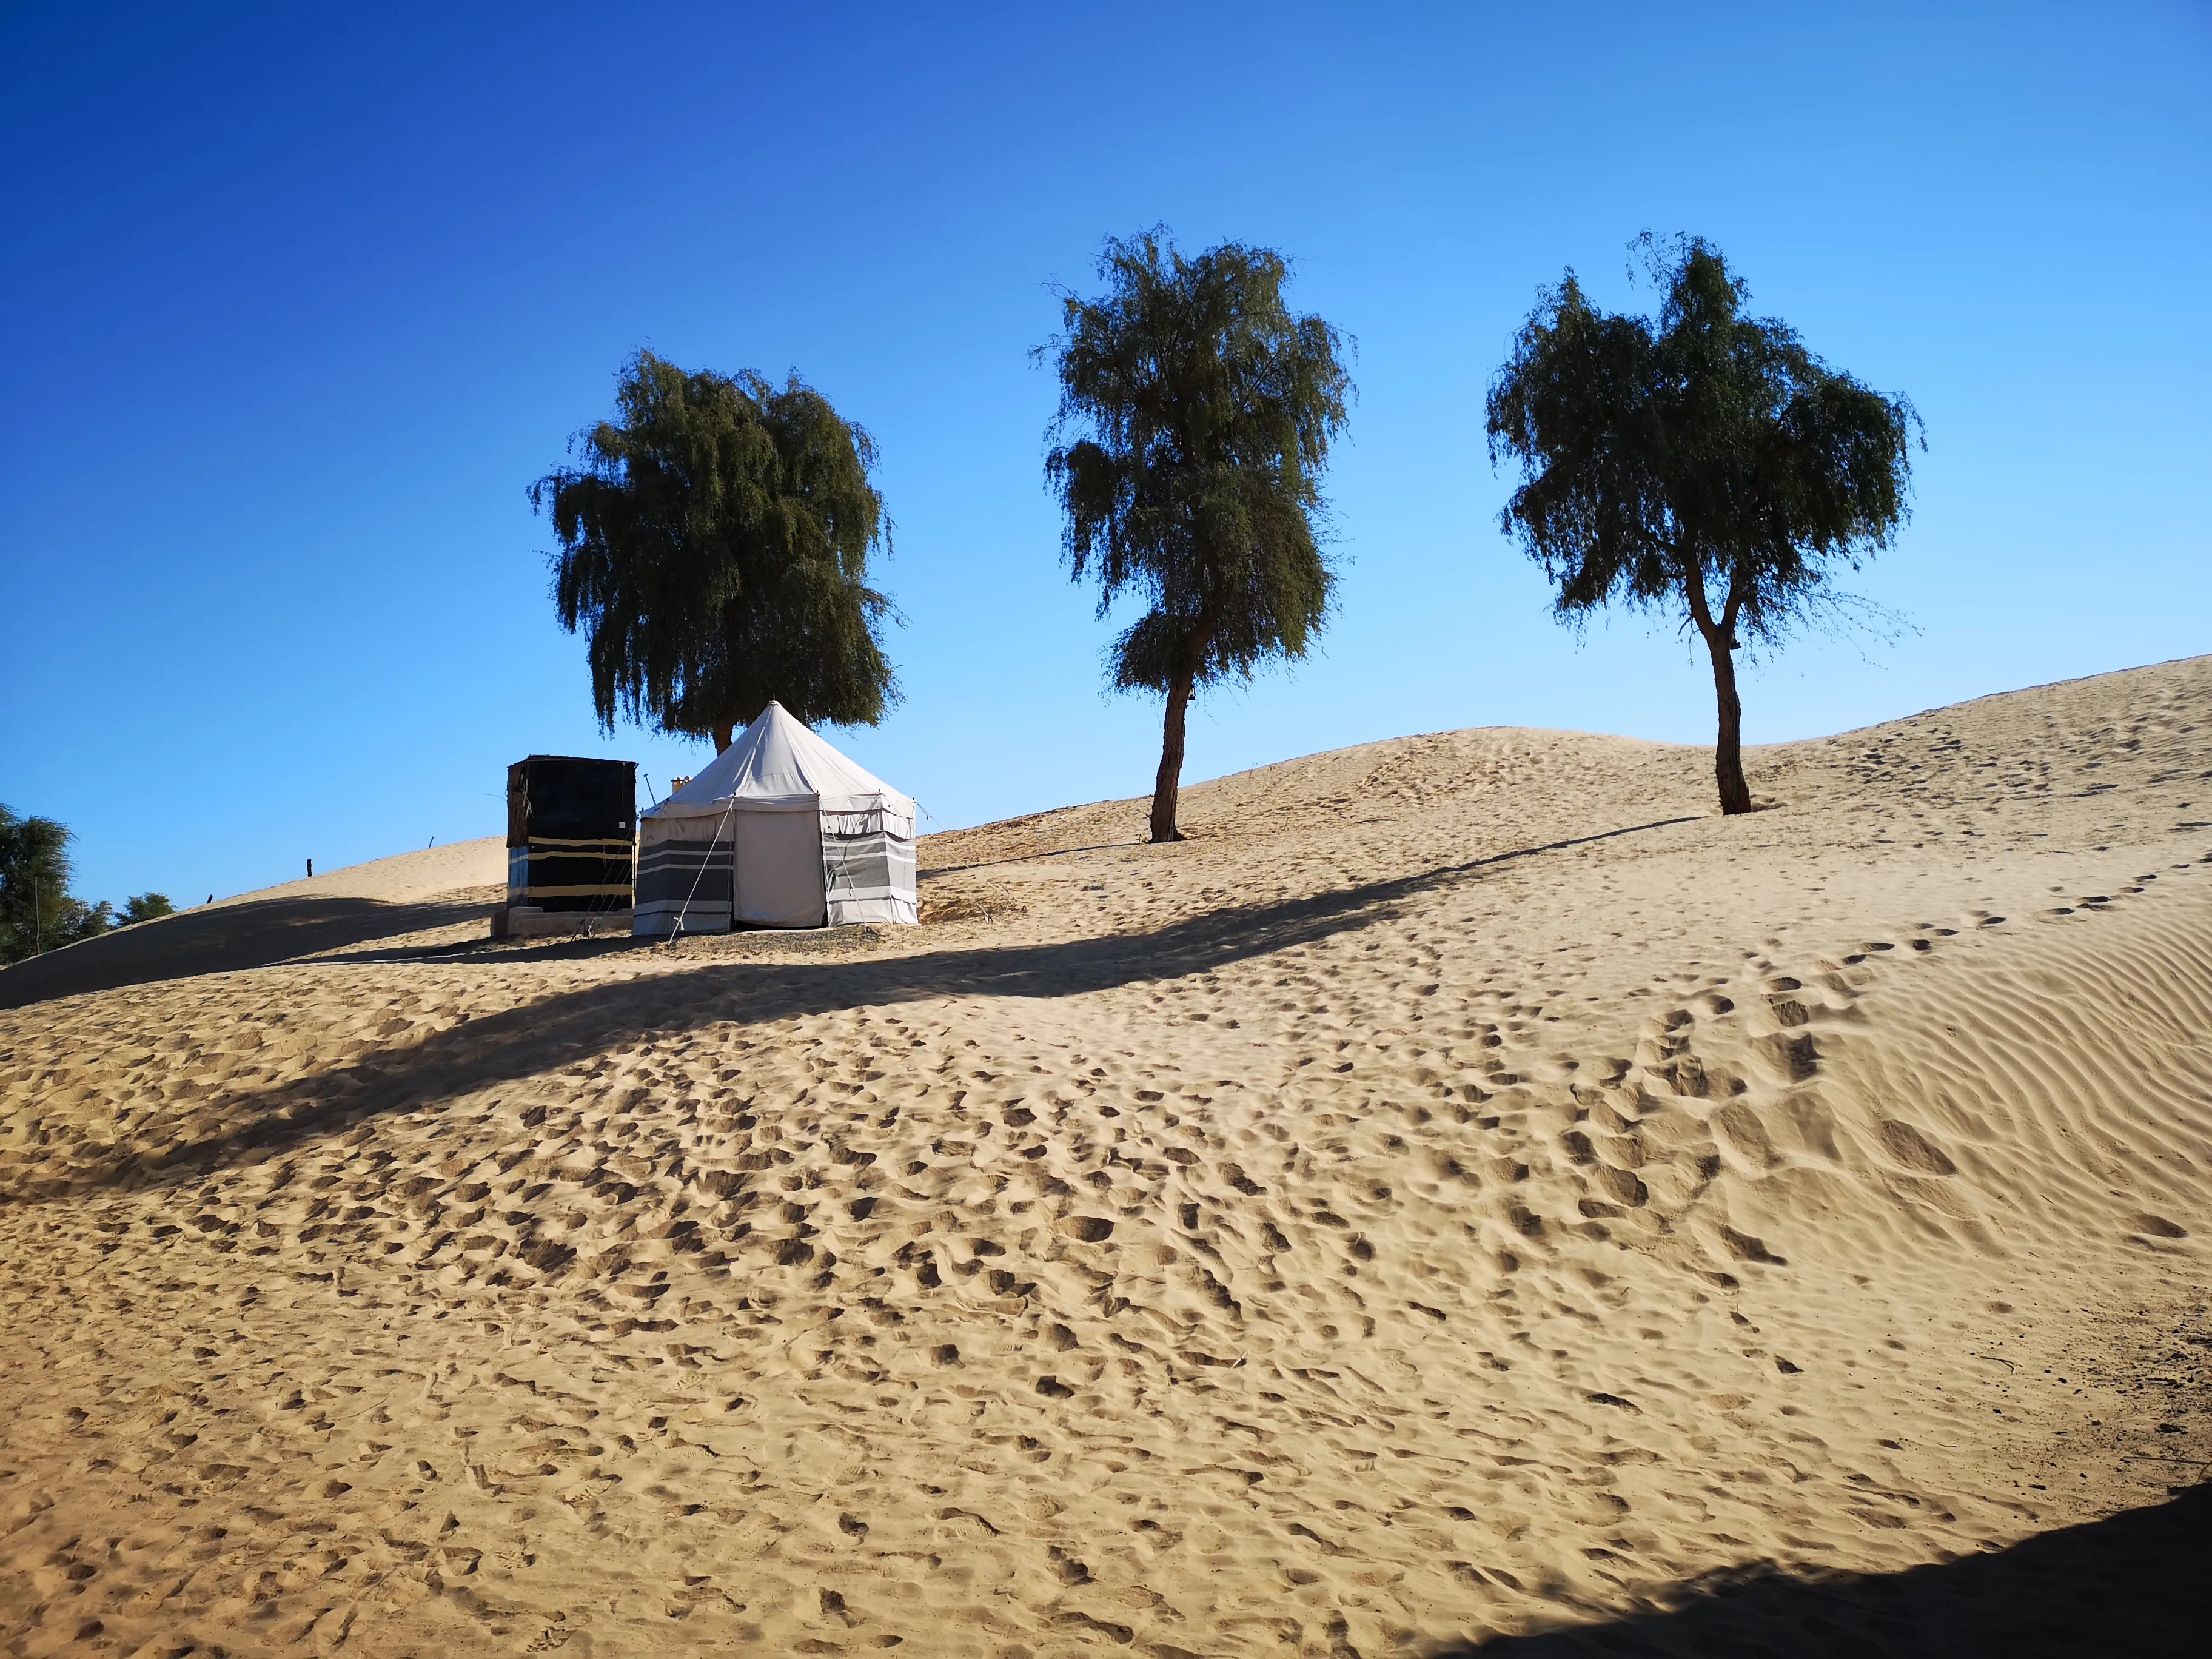 Al-Reem Desert Camp is located at the edge of the desert and accessible by saloon car.